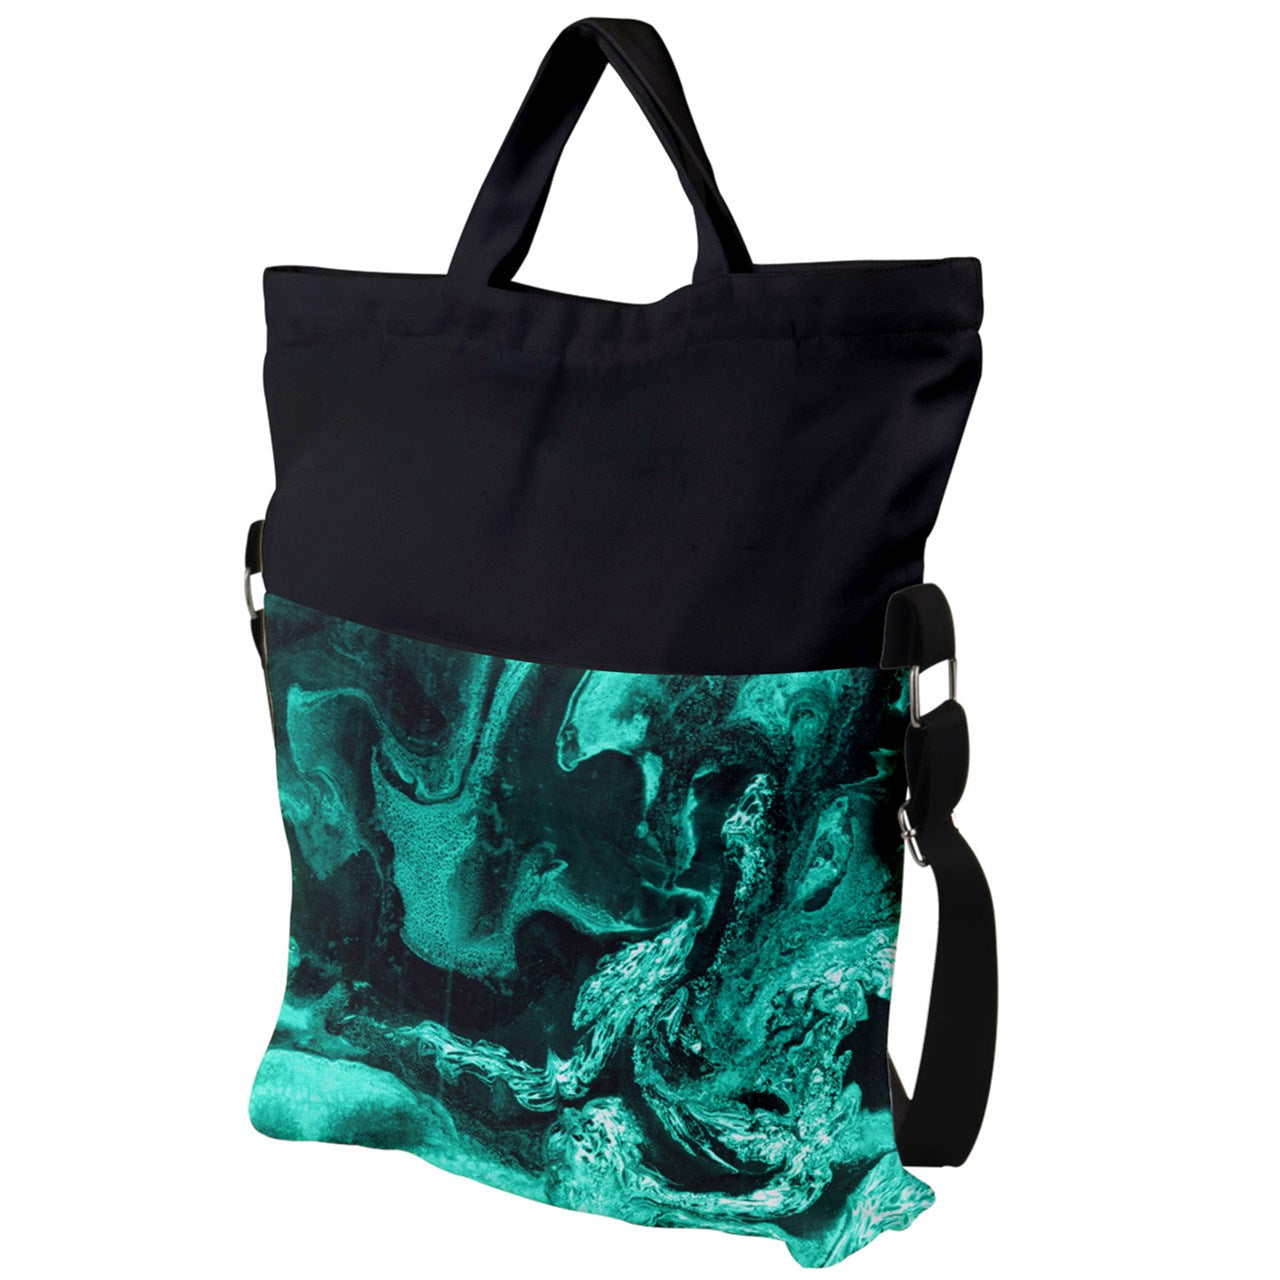 Gems from Embers - Fold-over Tote